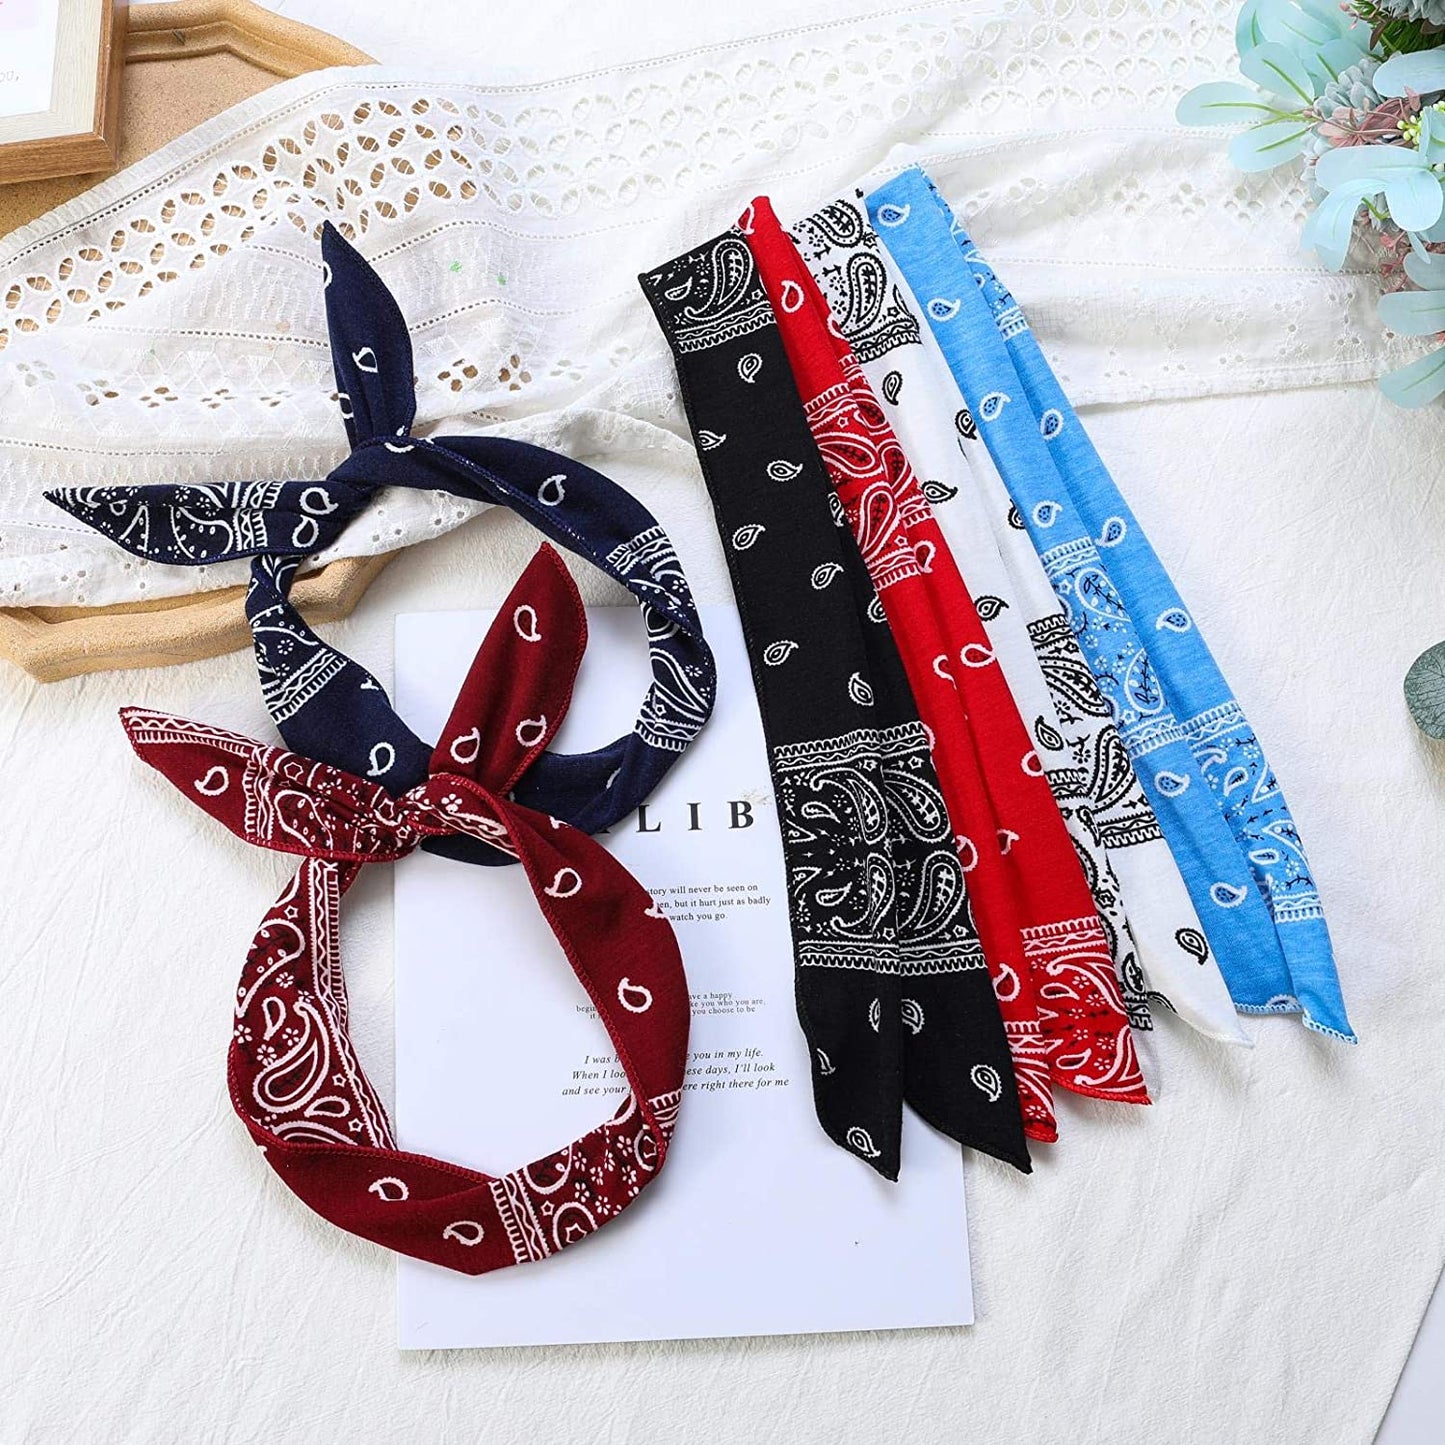 Wire Headbands for Women Paisley Twist Bow Hair Bands Bunny Ears Headwraps Wire Hair Holder Hair Accessories for Workout Yoga Running Soccer Sports Pack of 6